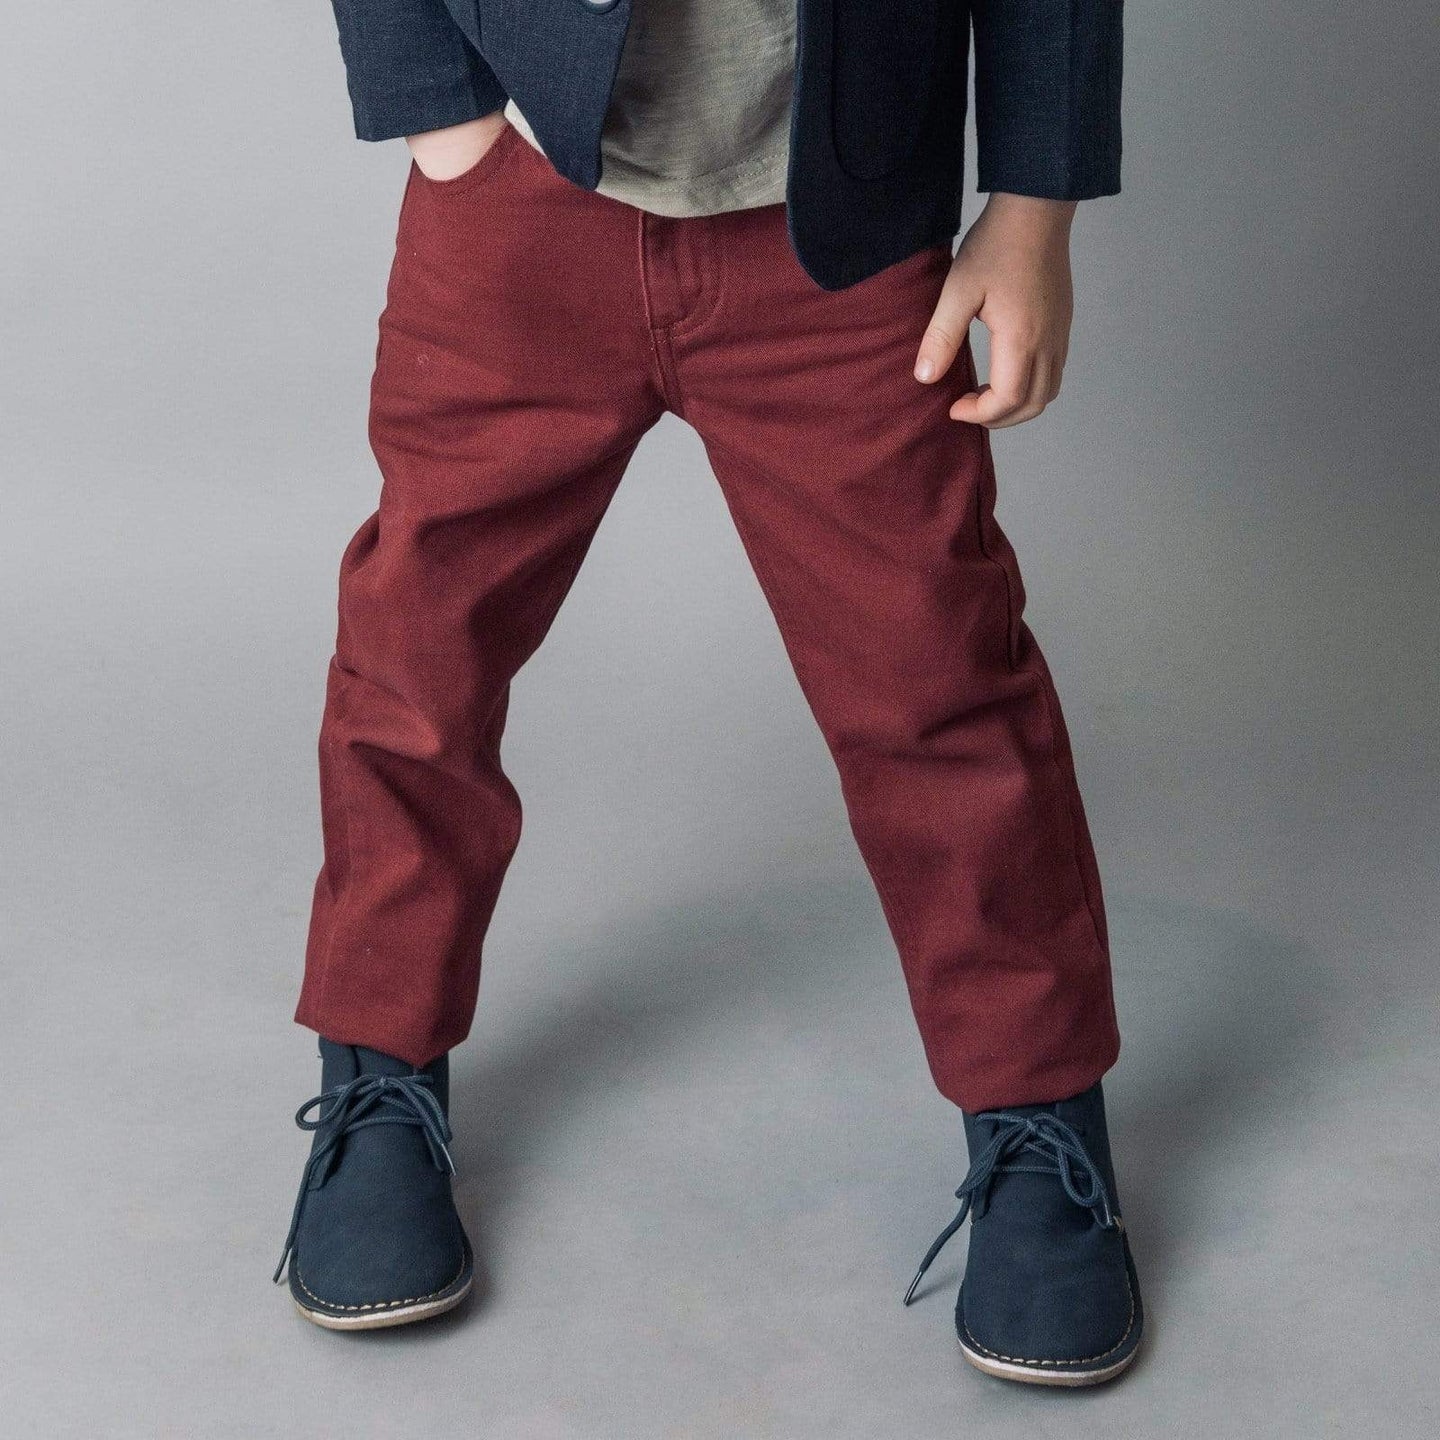 Men's Chinos red | Trousers for Men | Zalando